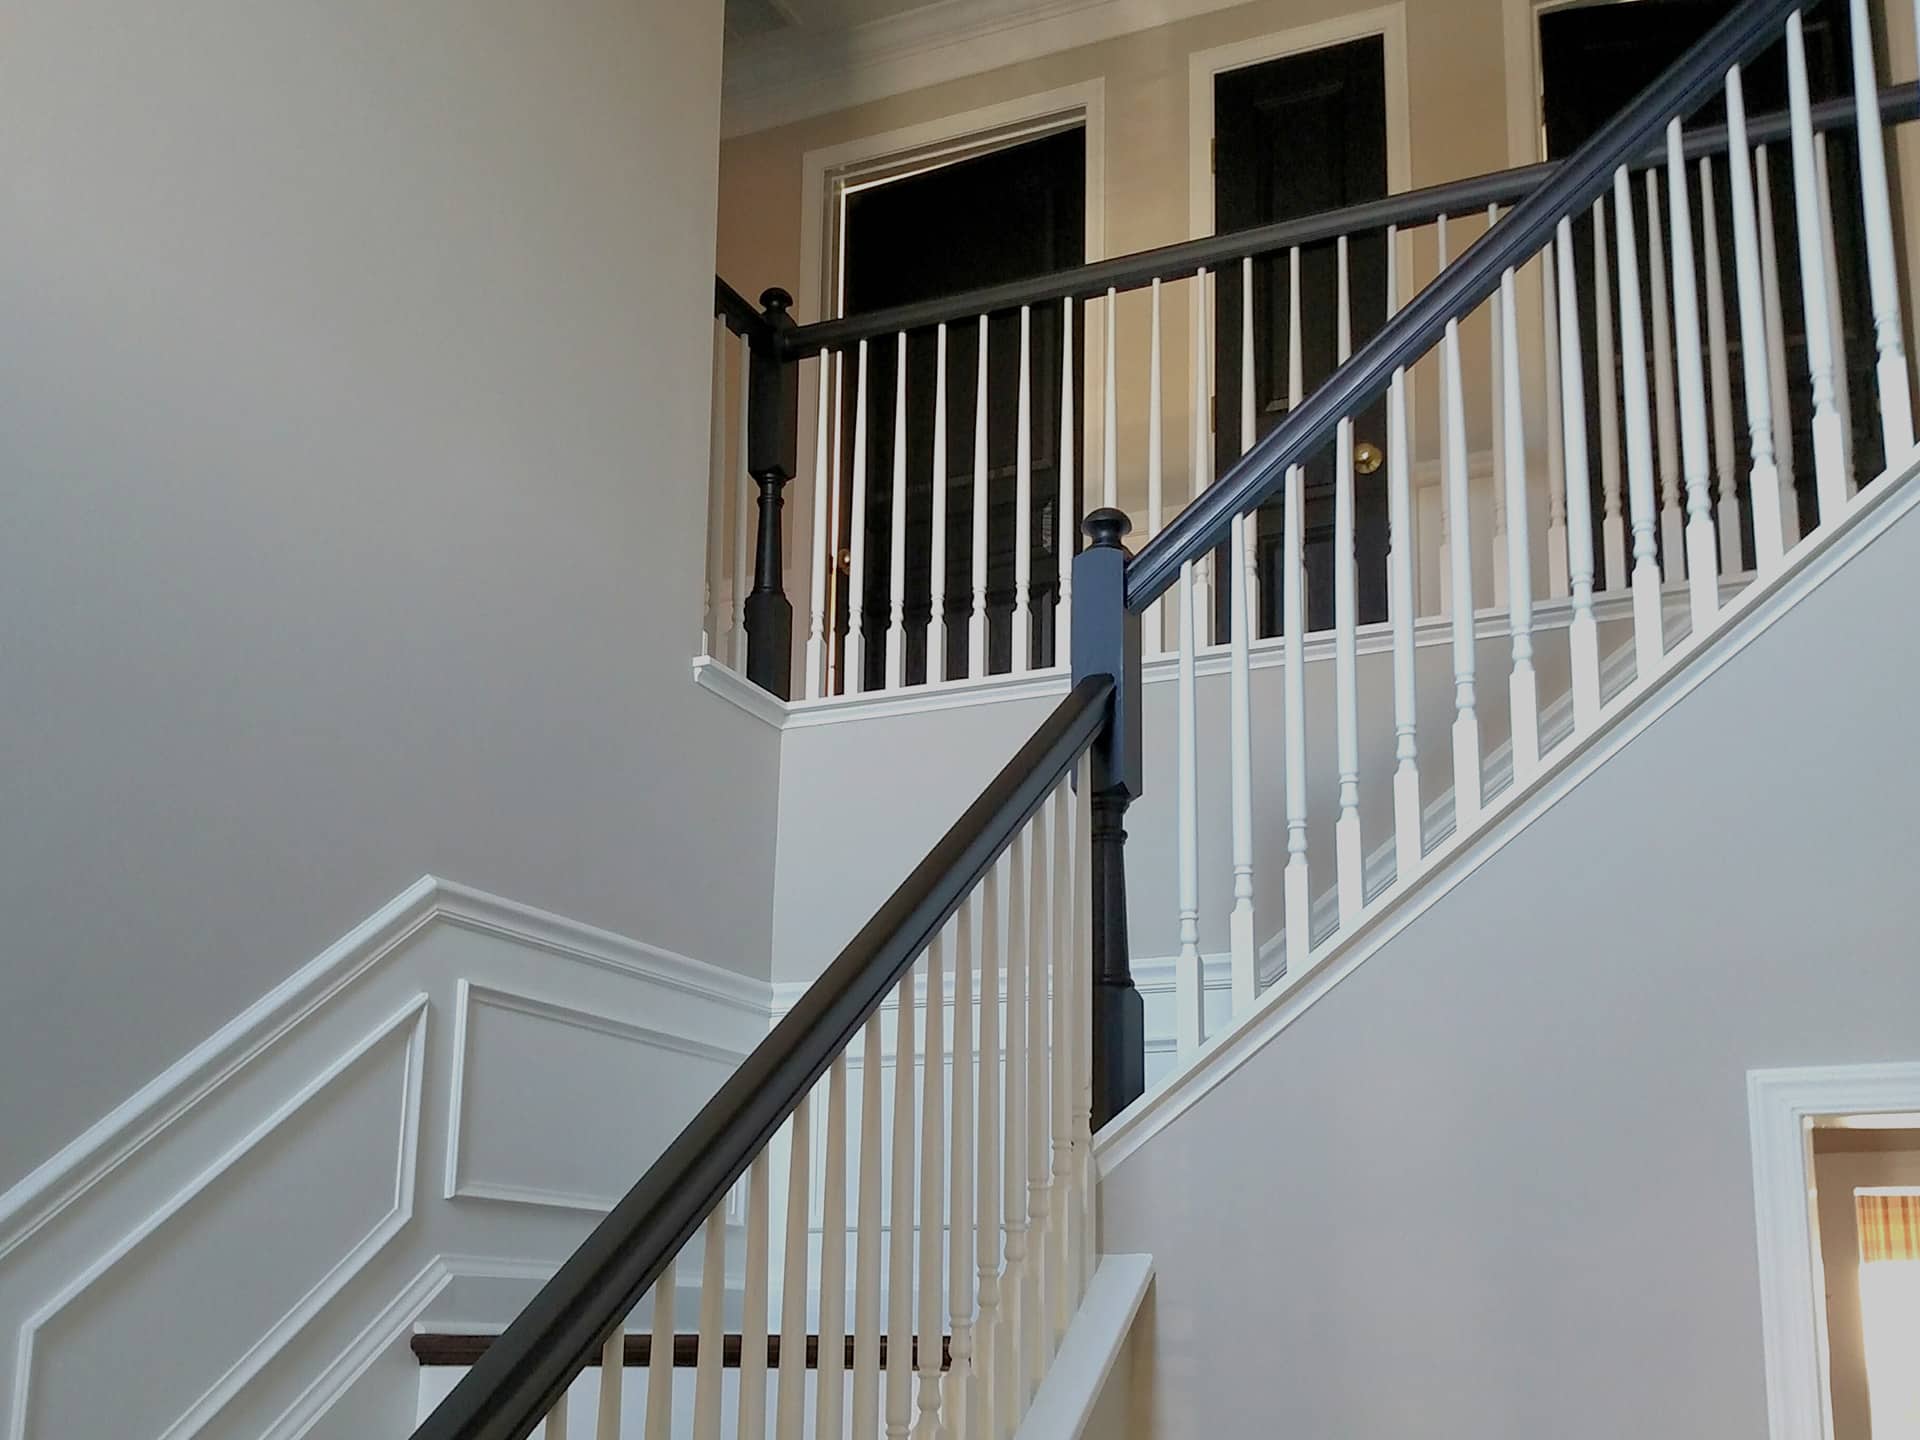 staircase with white wall